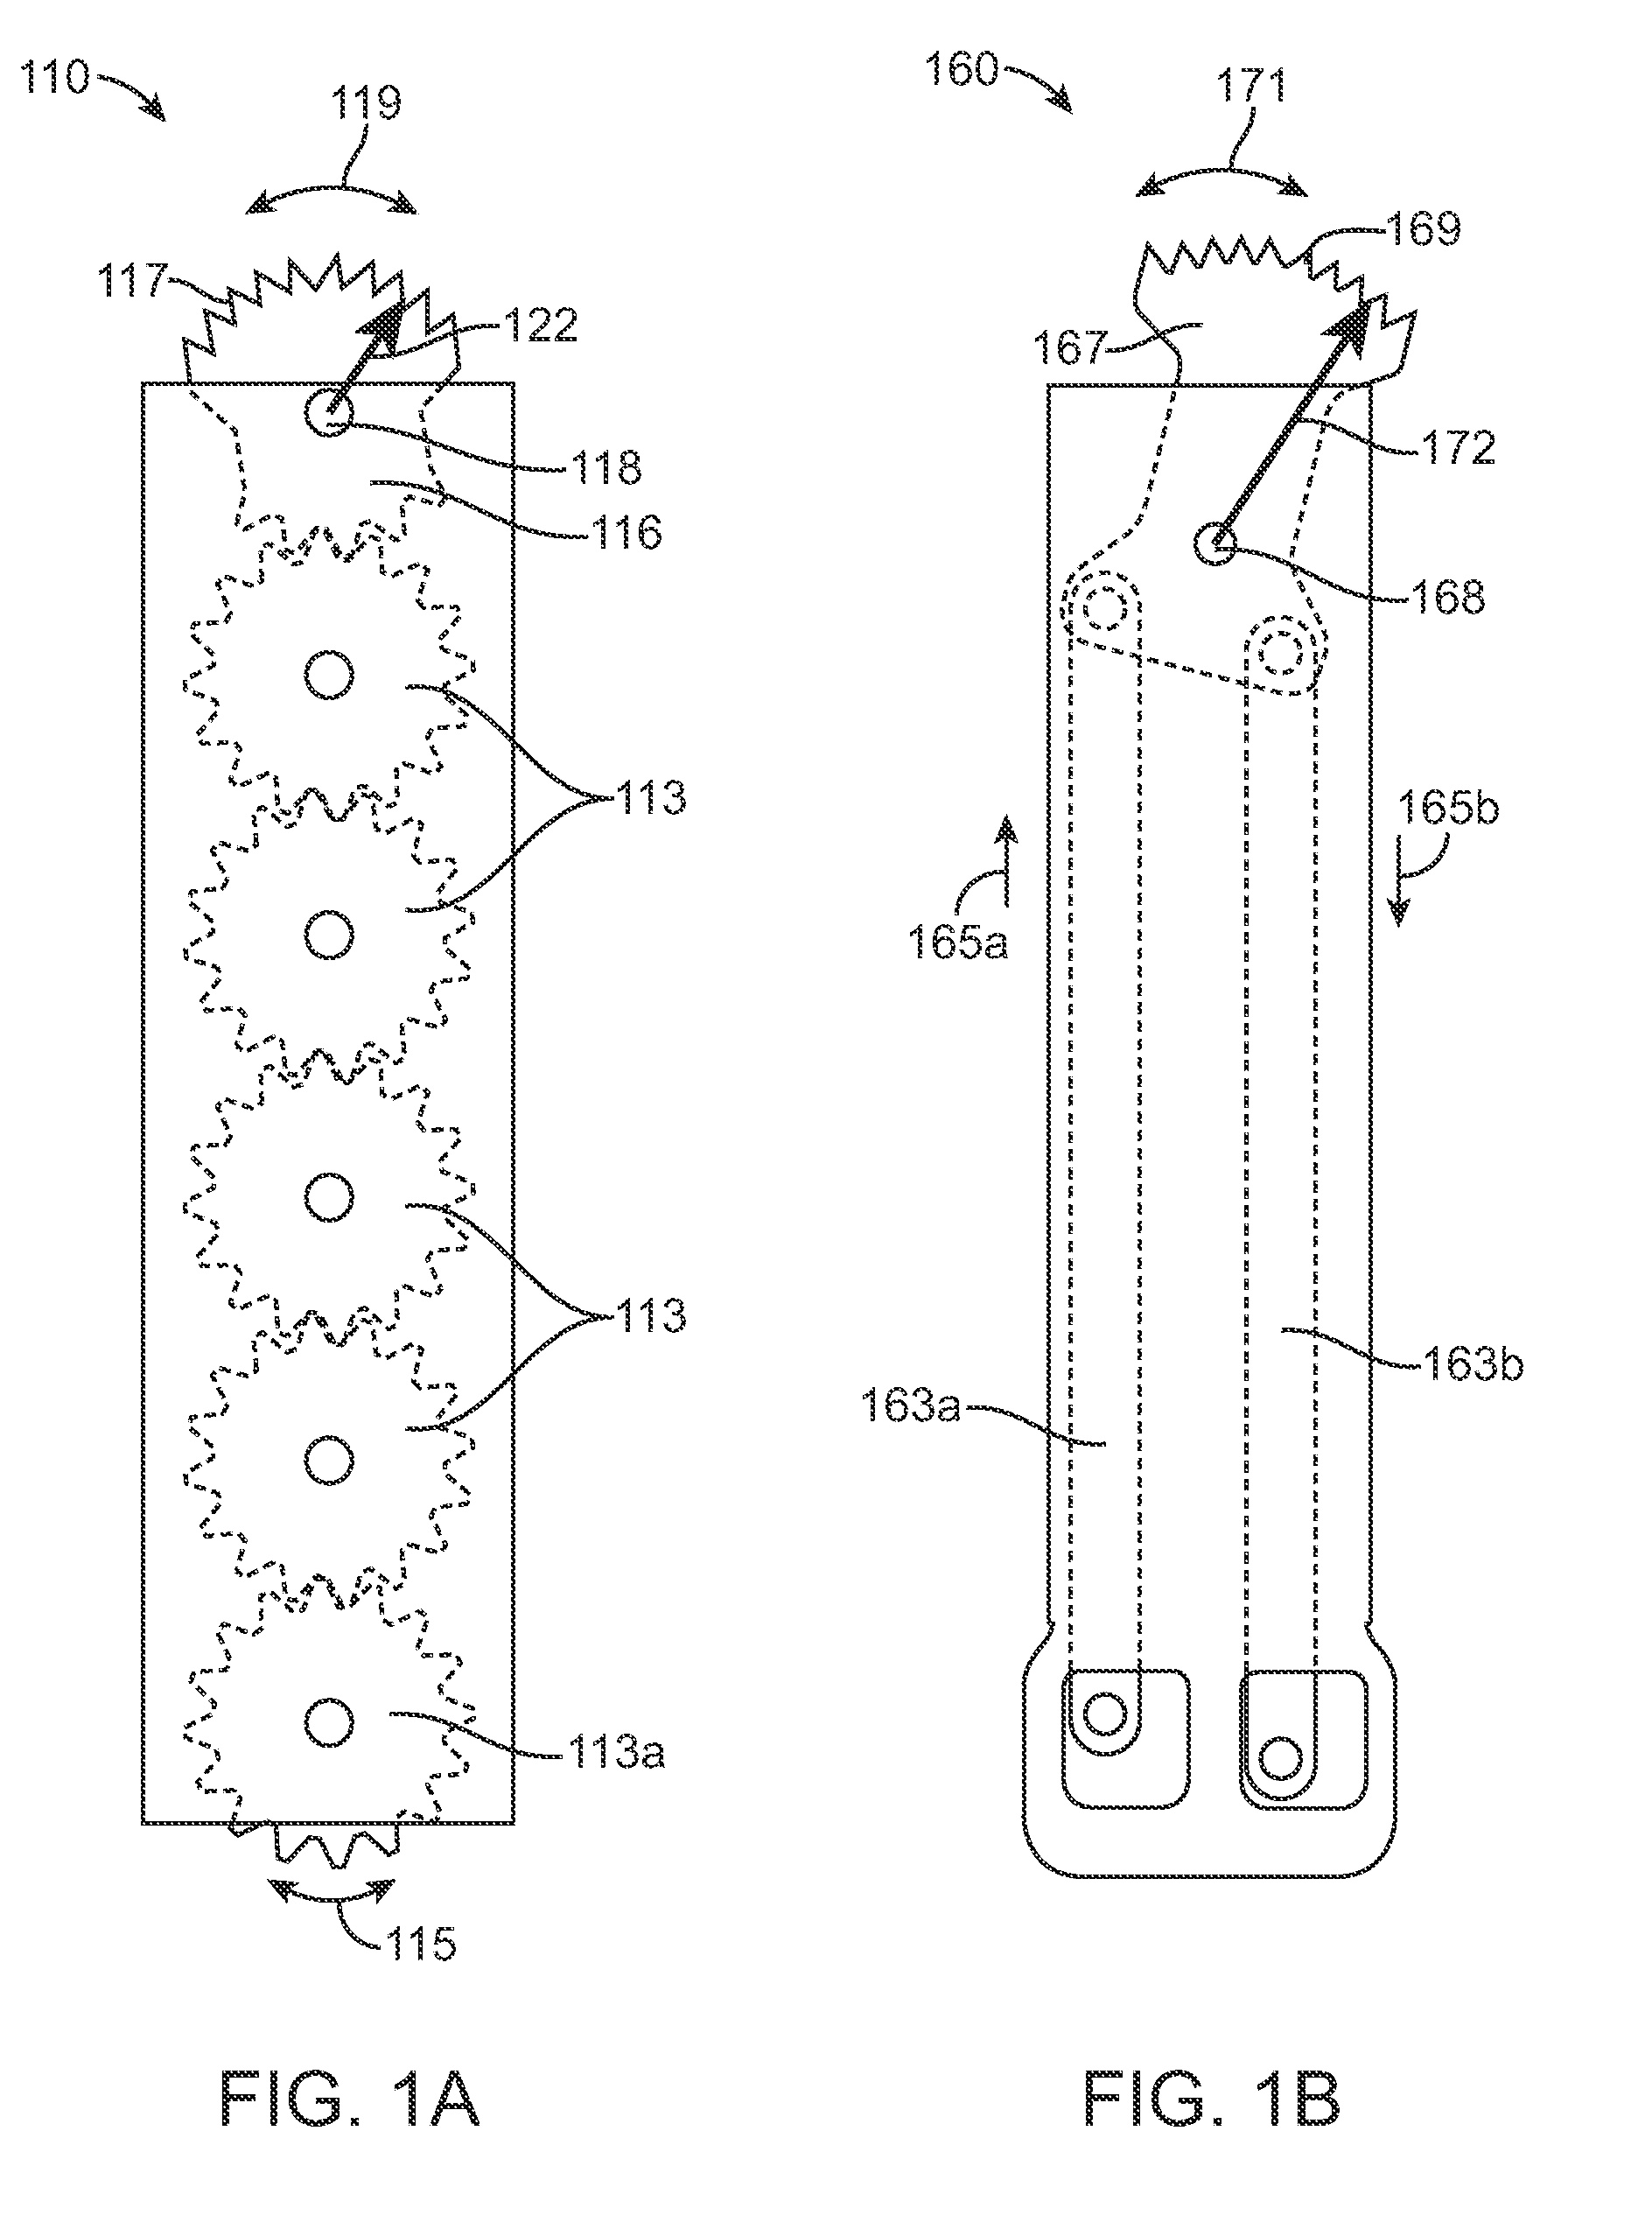 Surgical saw blade device and system